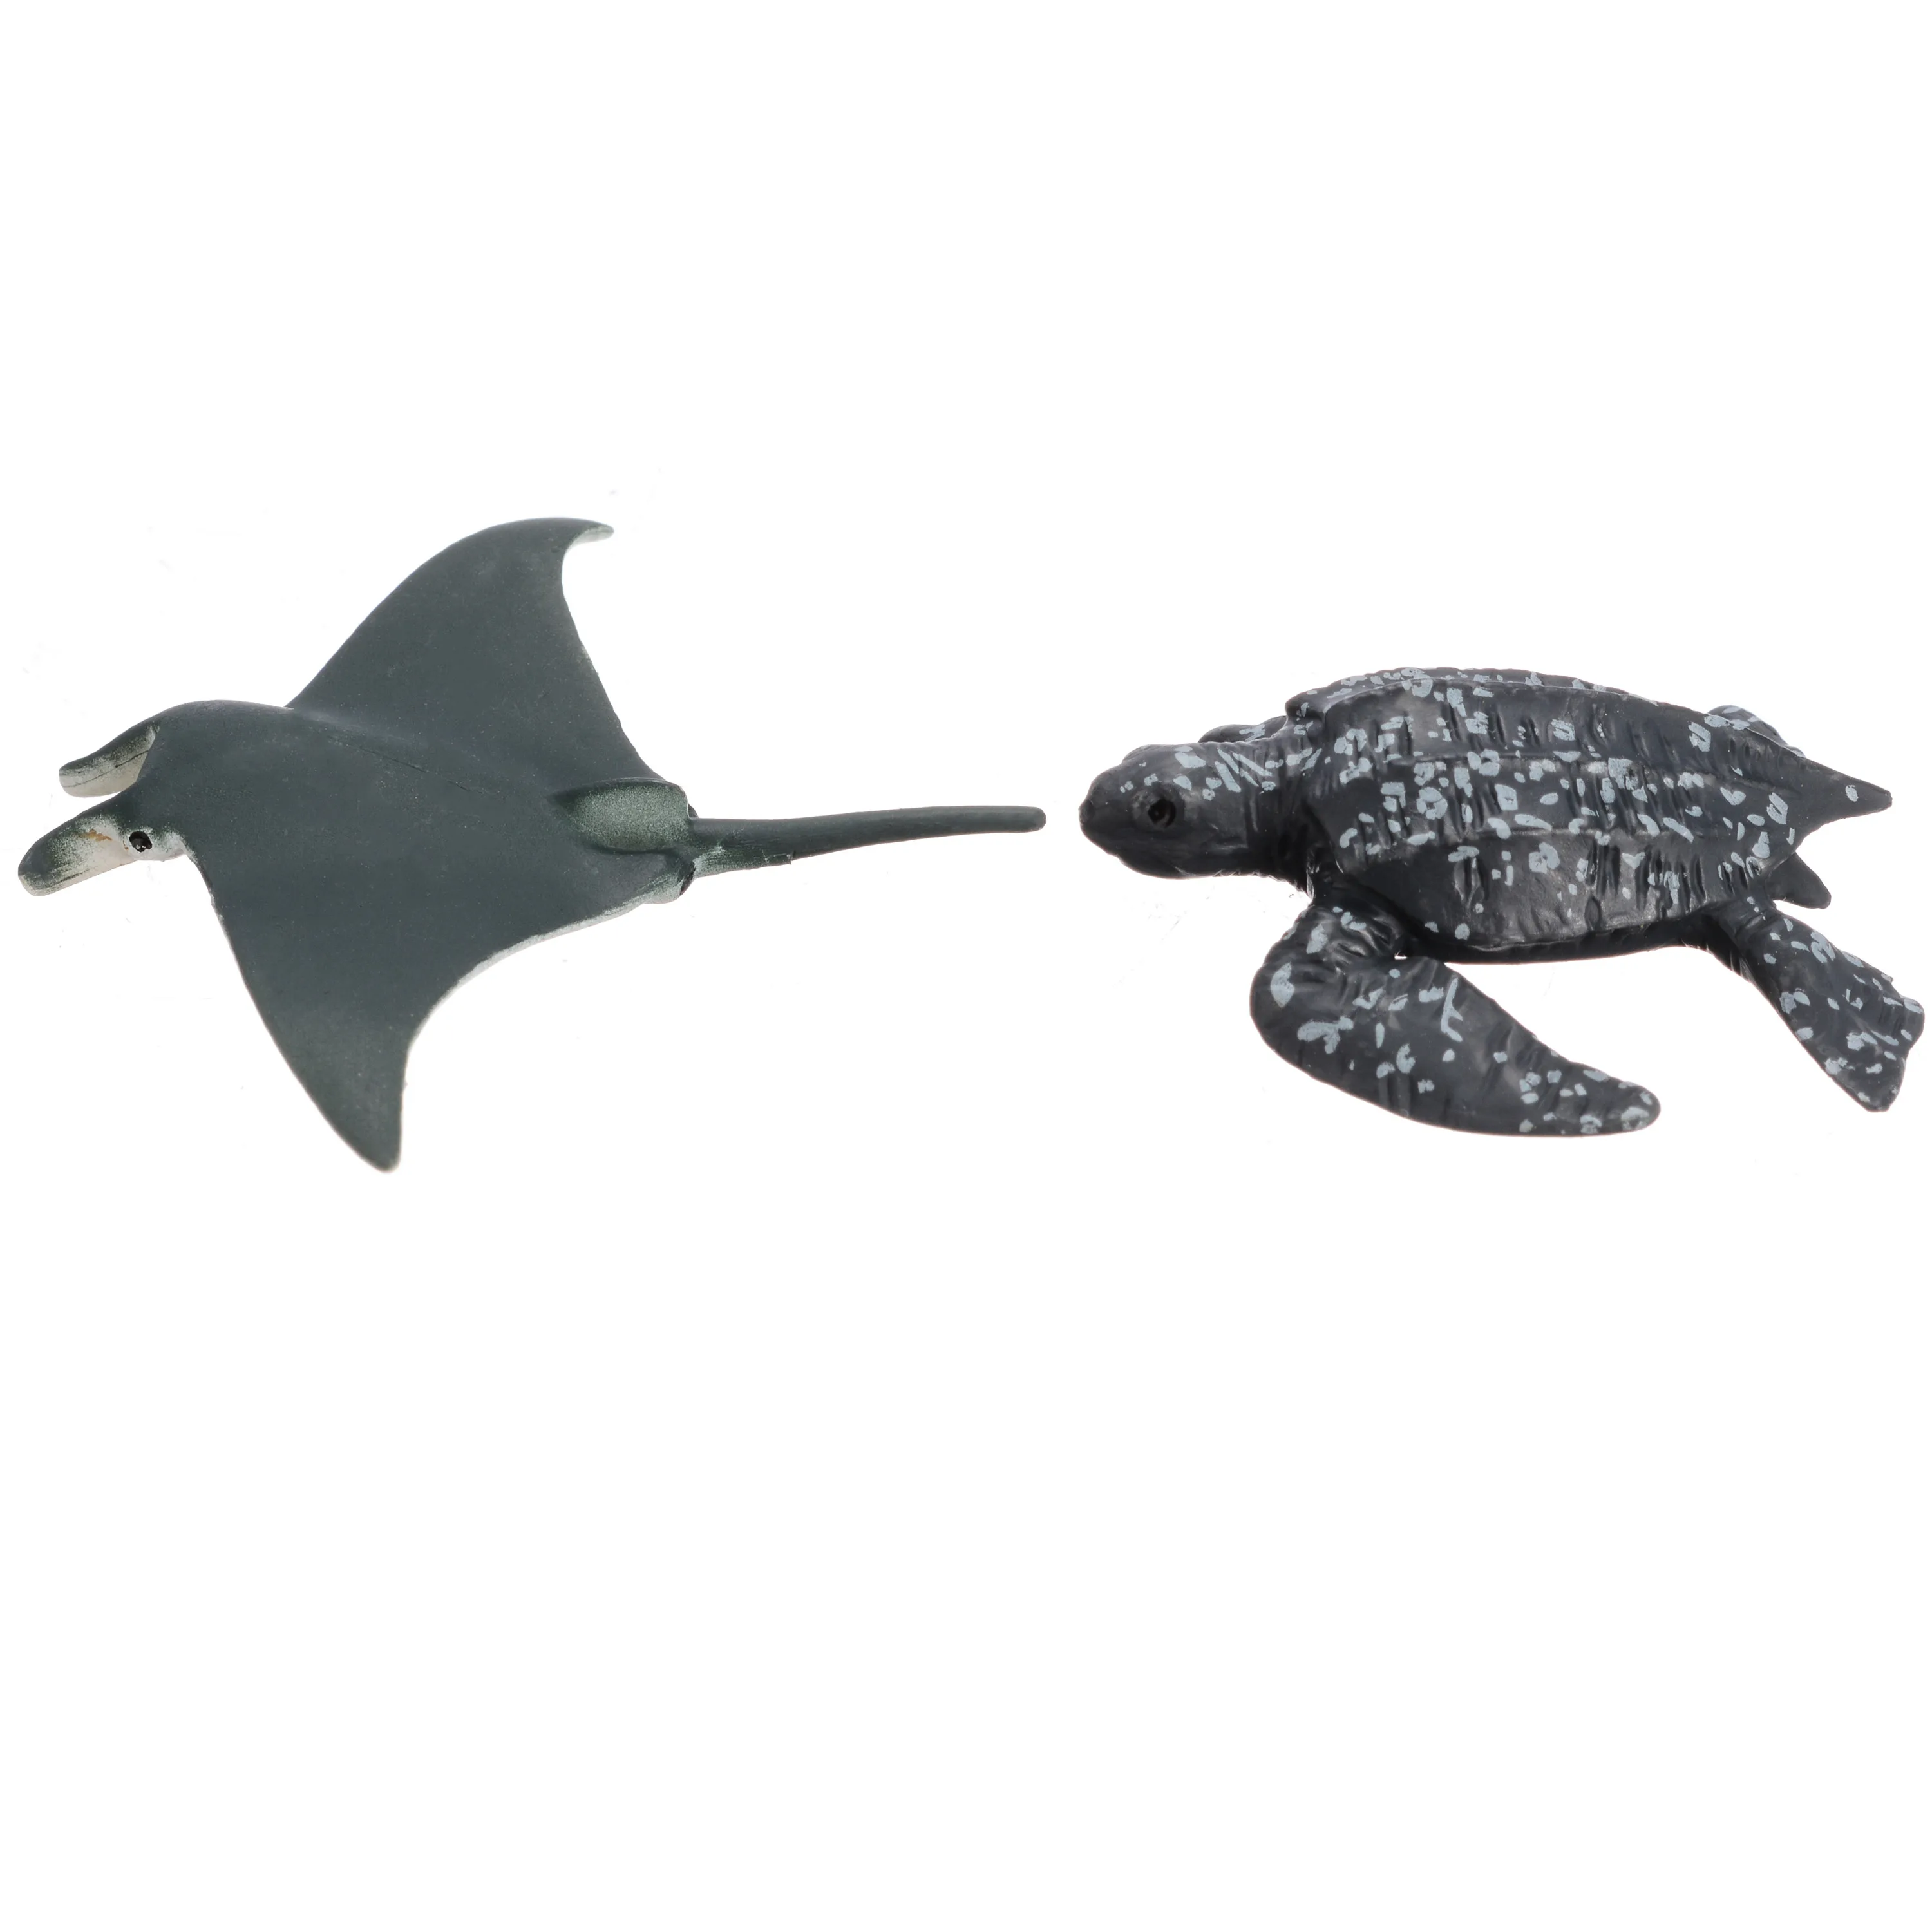 12pcs Ocean Sea Life Simulation Animal Model Sets Shark Whale Turtle Crab Dolphin Action Toy Figures Kids Educational Toys